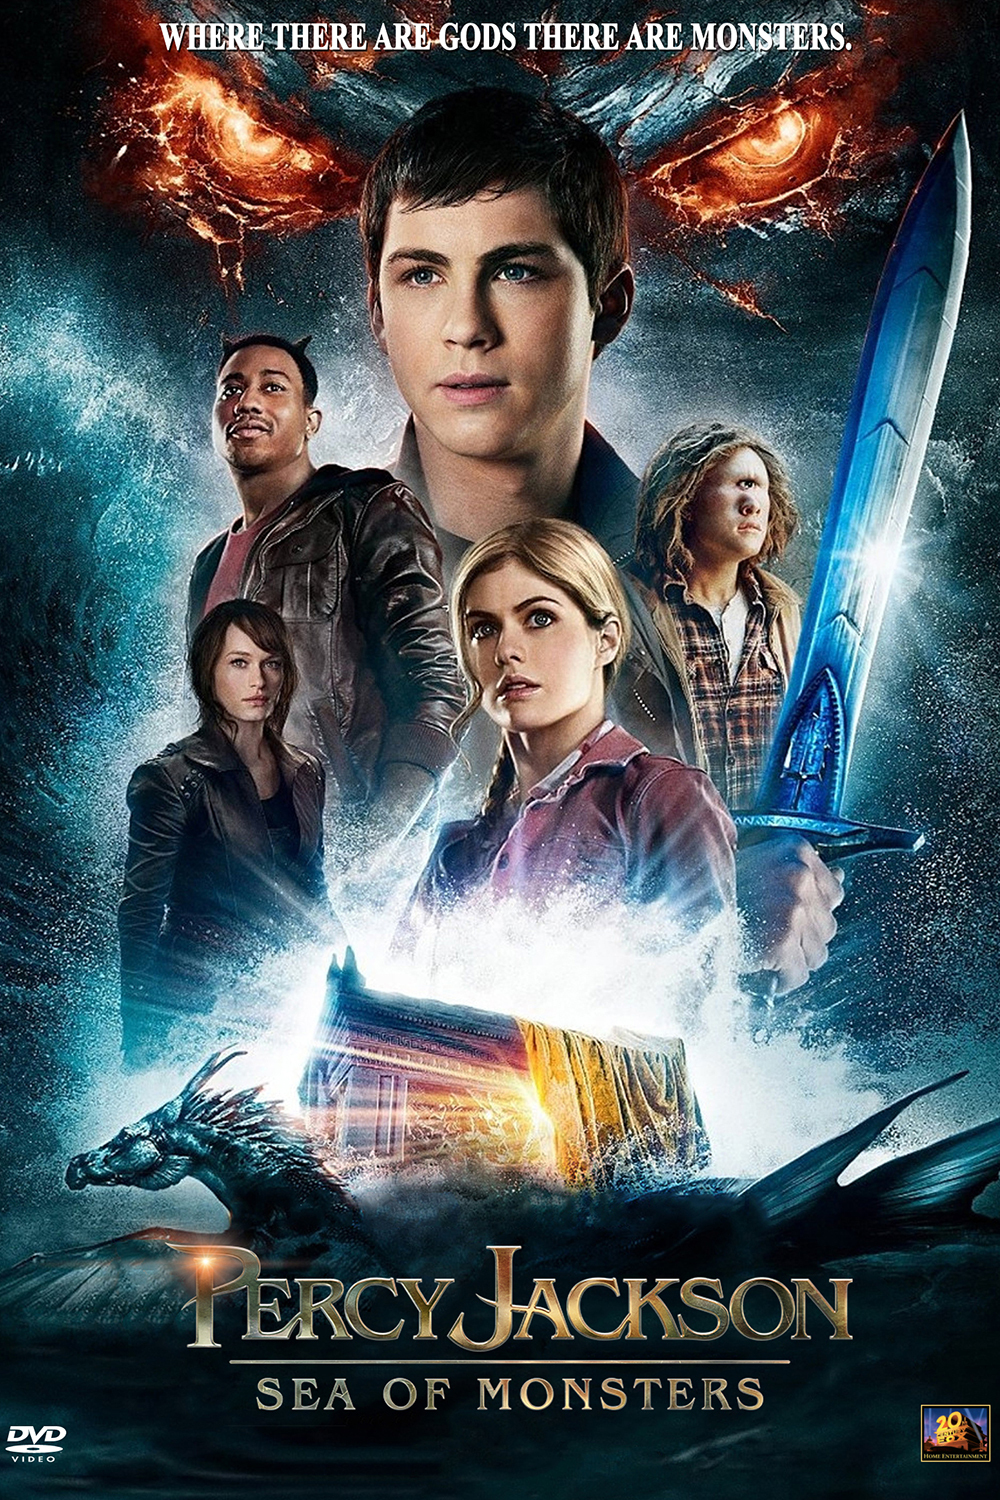 43 HQ Photos Percy Jackson Movies In Order - Percy Jackson - Sea of Monsters (2013) (In Hindi) Watch ...